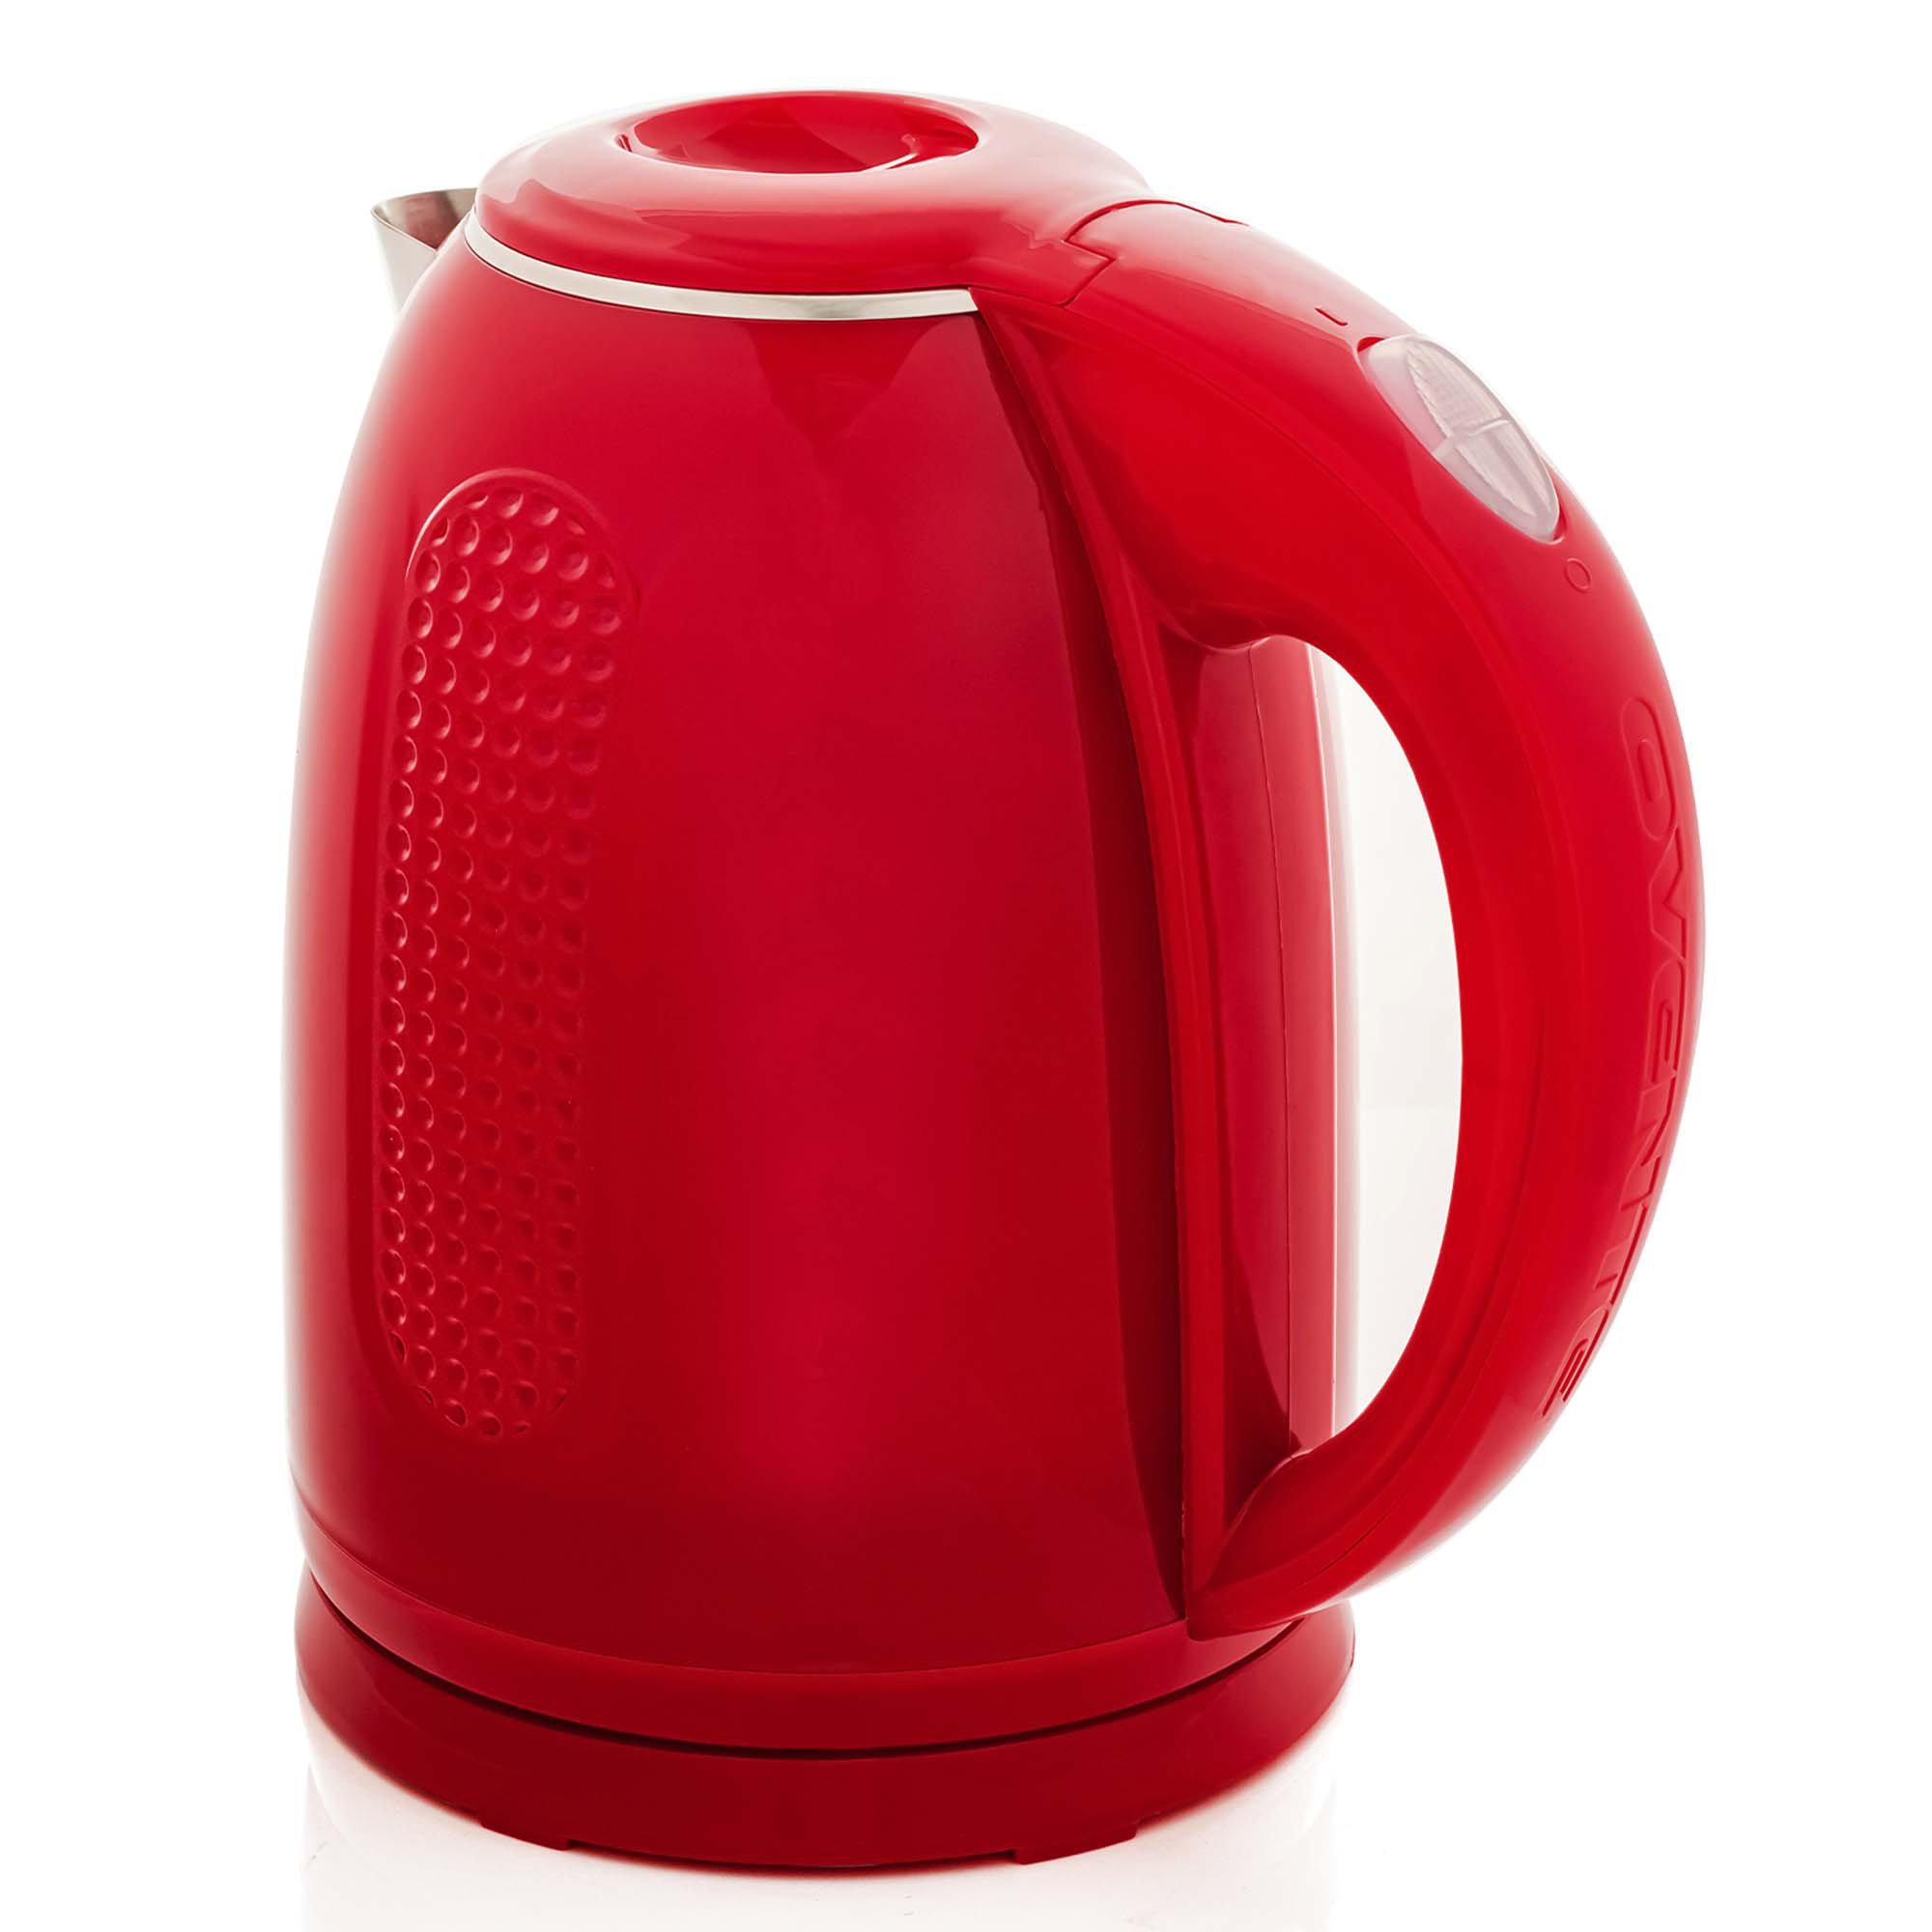 OVENTE 1.7L Green BPA-Free Electric Kettle, Fast Heating Water